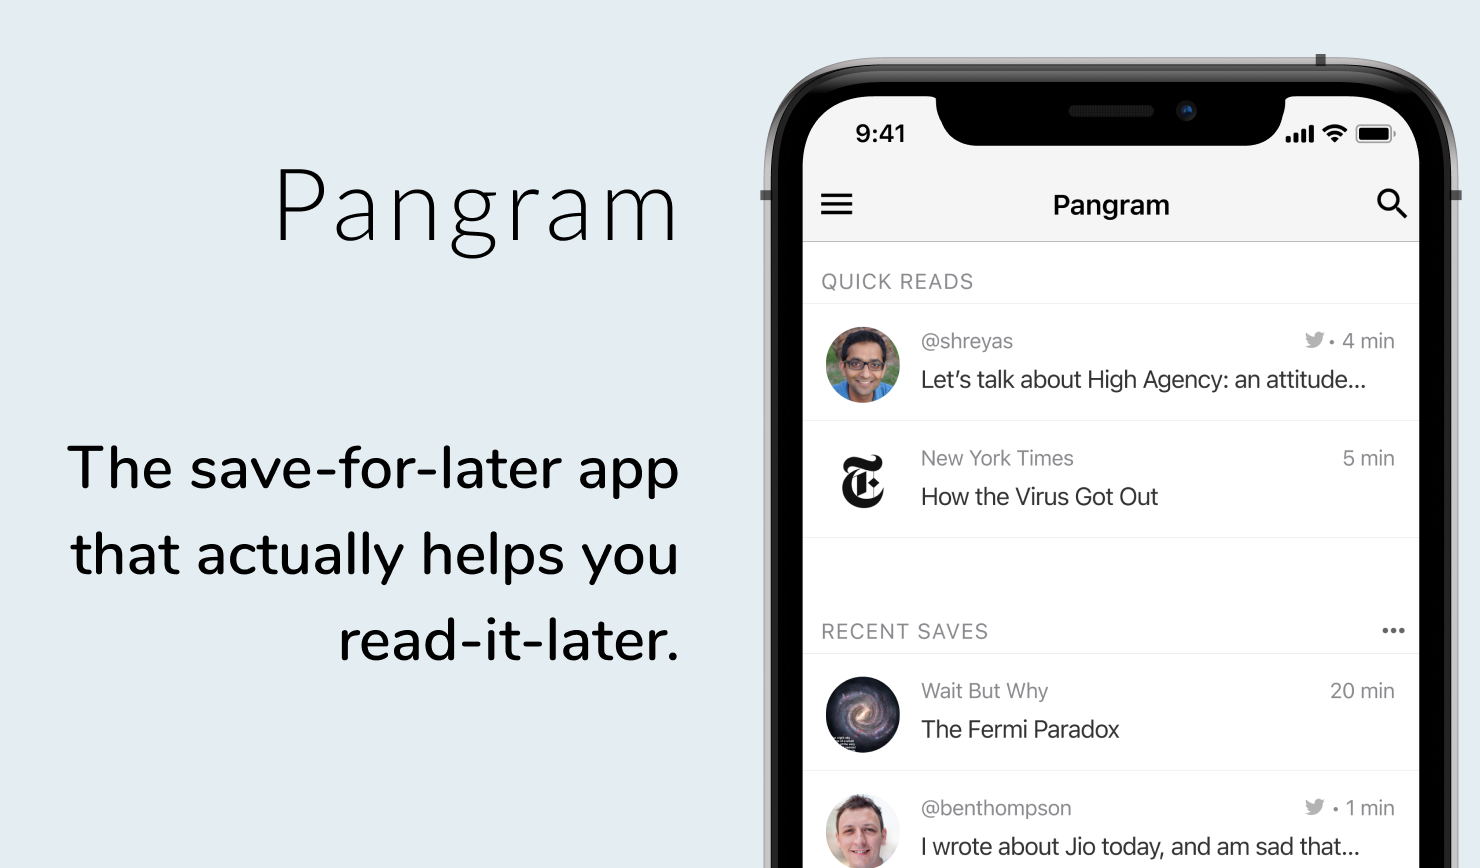 Pangram: The save-for-later app that actually helps you read-it-later